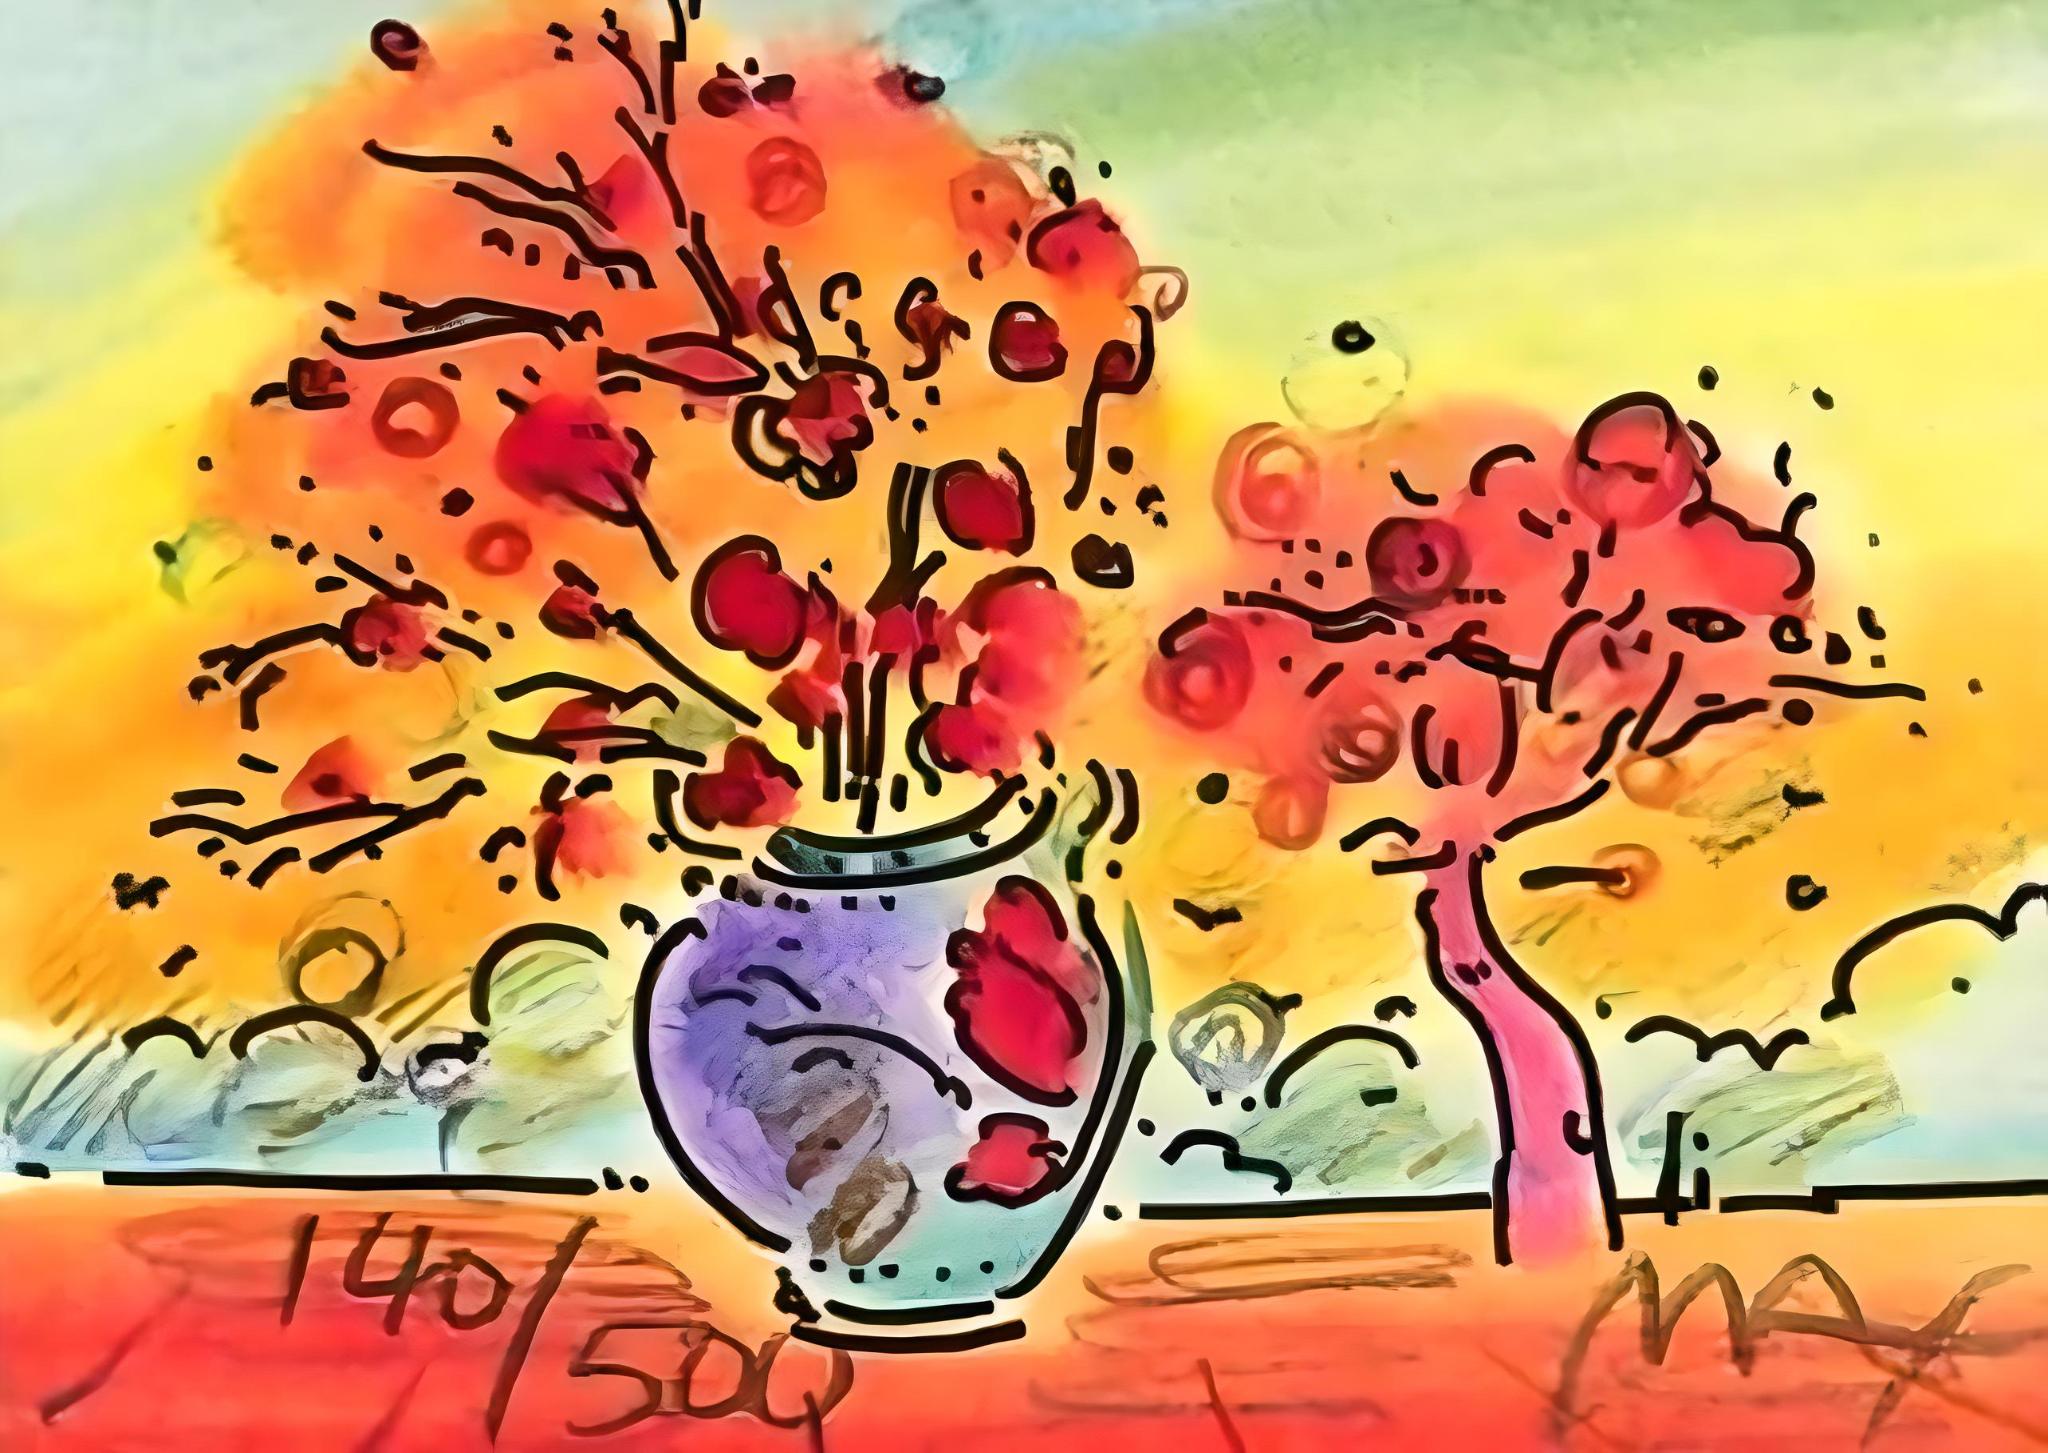 Artist: Peter Max (1937)
Title: Vase with Tree
Year: 2000
Edition: 140/500, plus proofs
Medium: Lithograph on Lustro Saxony paper
Size: 2 x 2.75 inches
Condition: Excellent
Inscription: Signed and numbered by the artist.
Notes: Published by Via